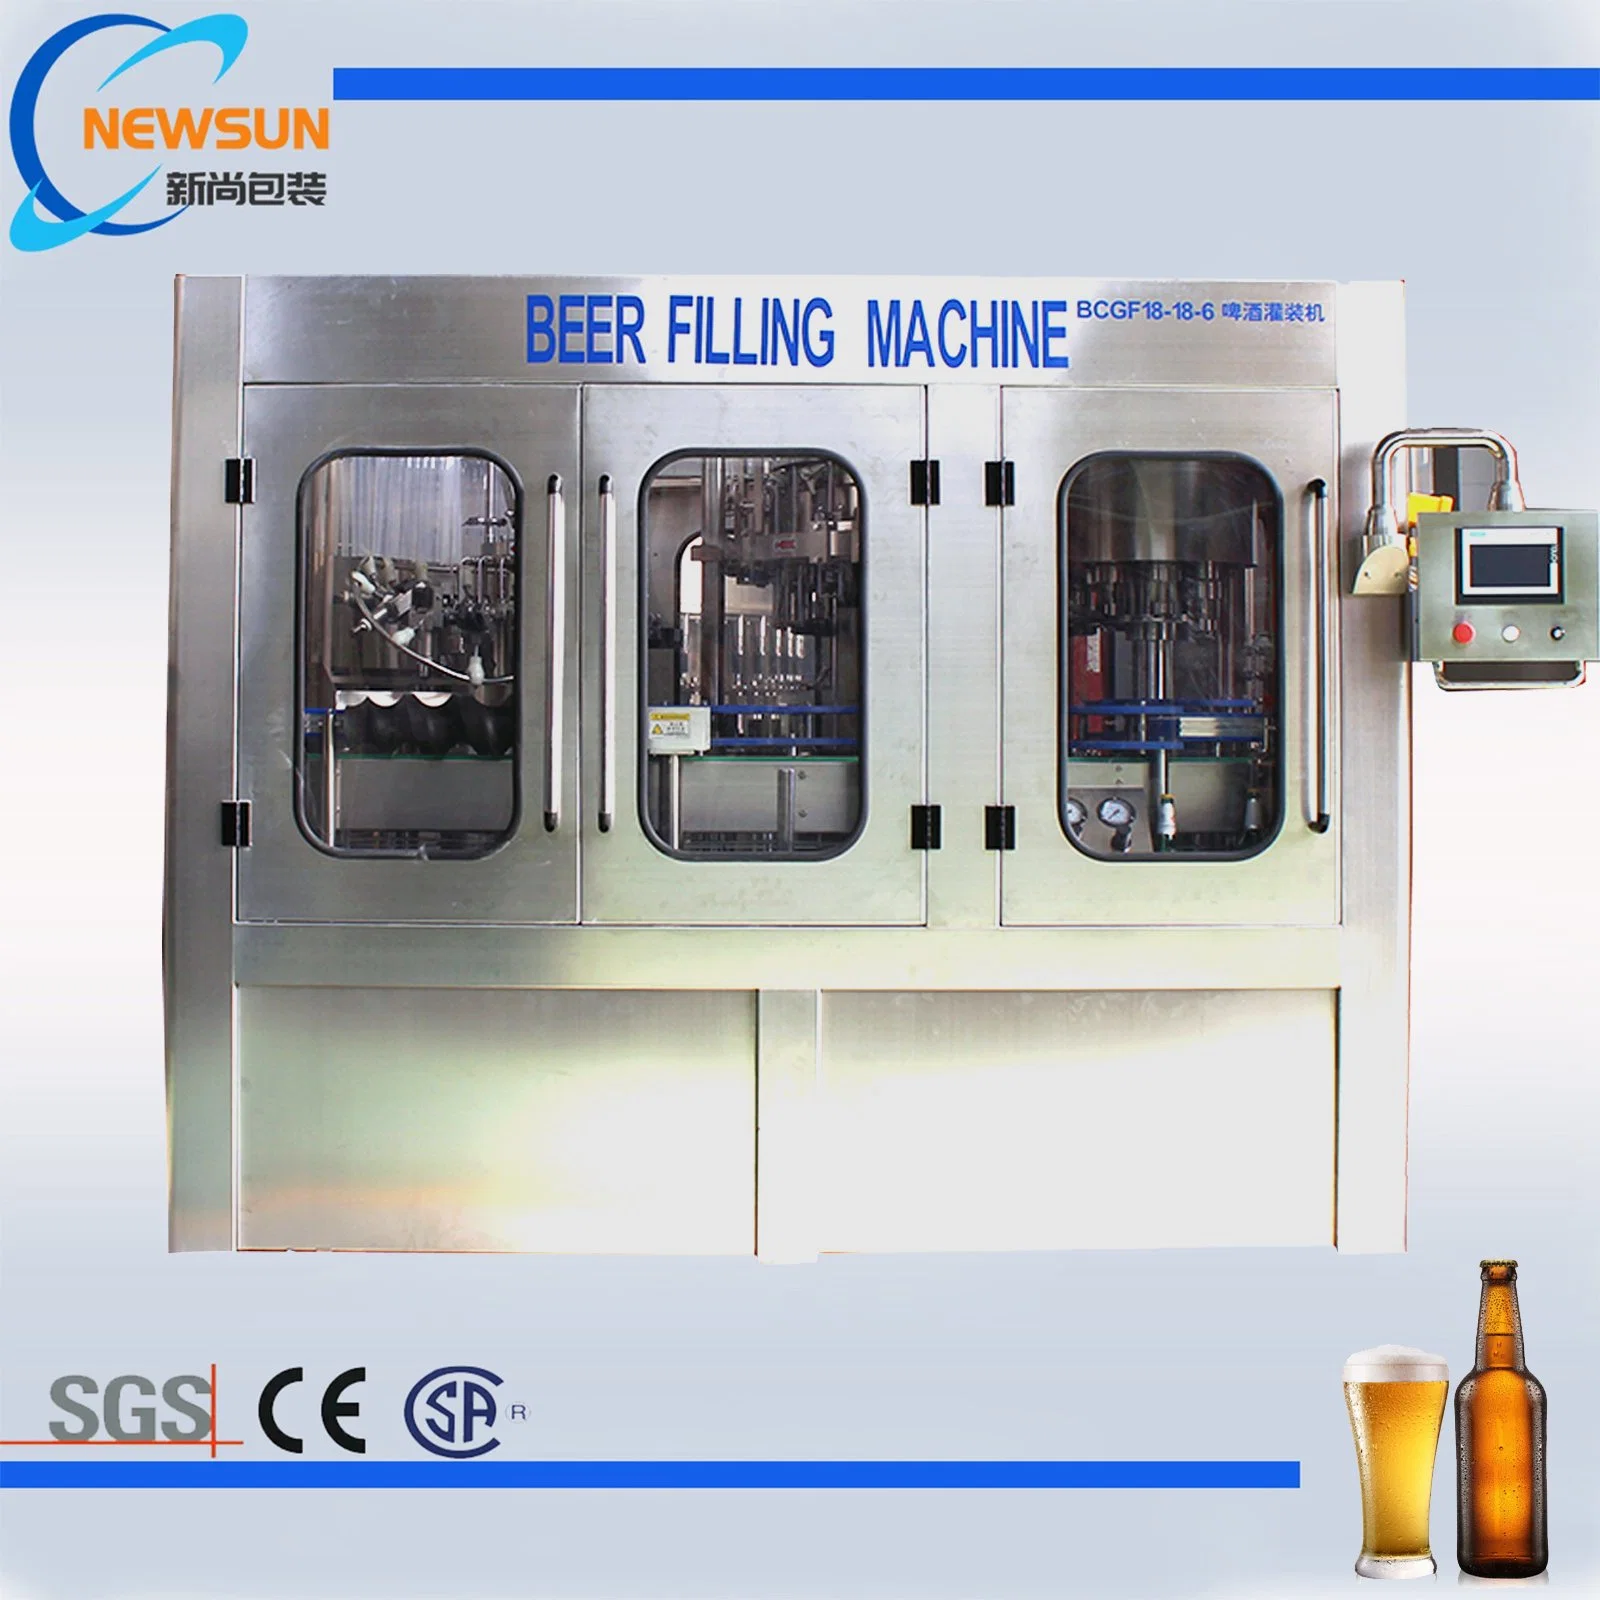 Newsun Machine Manufacturer Automatic Drinking Water Beverage Bottling Plant Beer Equipment Pet Glass Bottle Blowing Molding Filling Washing Labeling Machinery